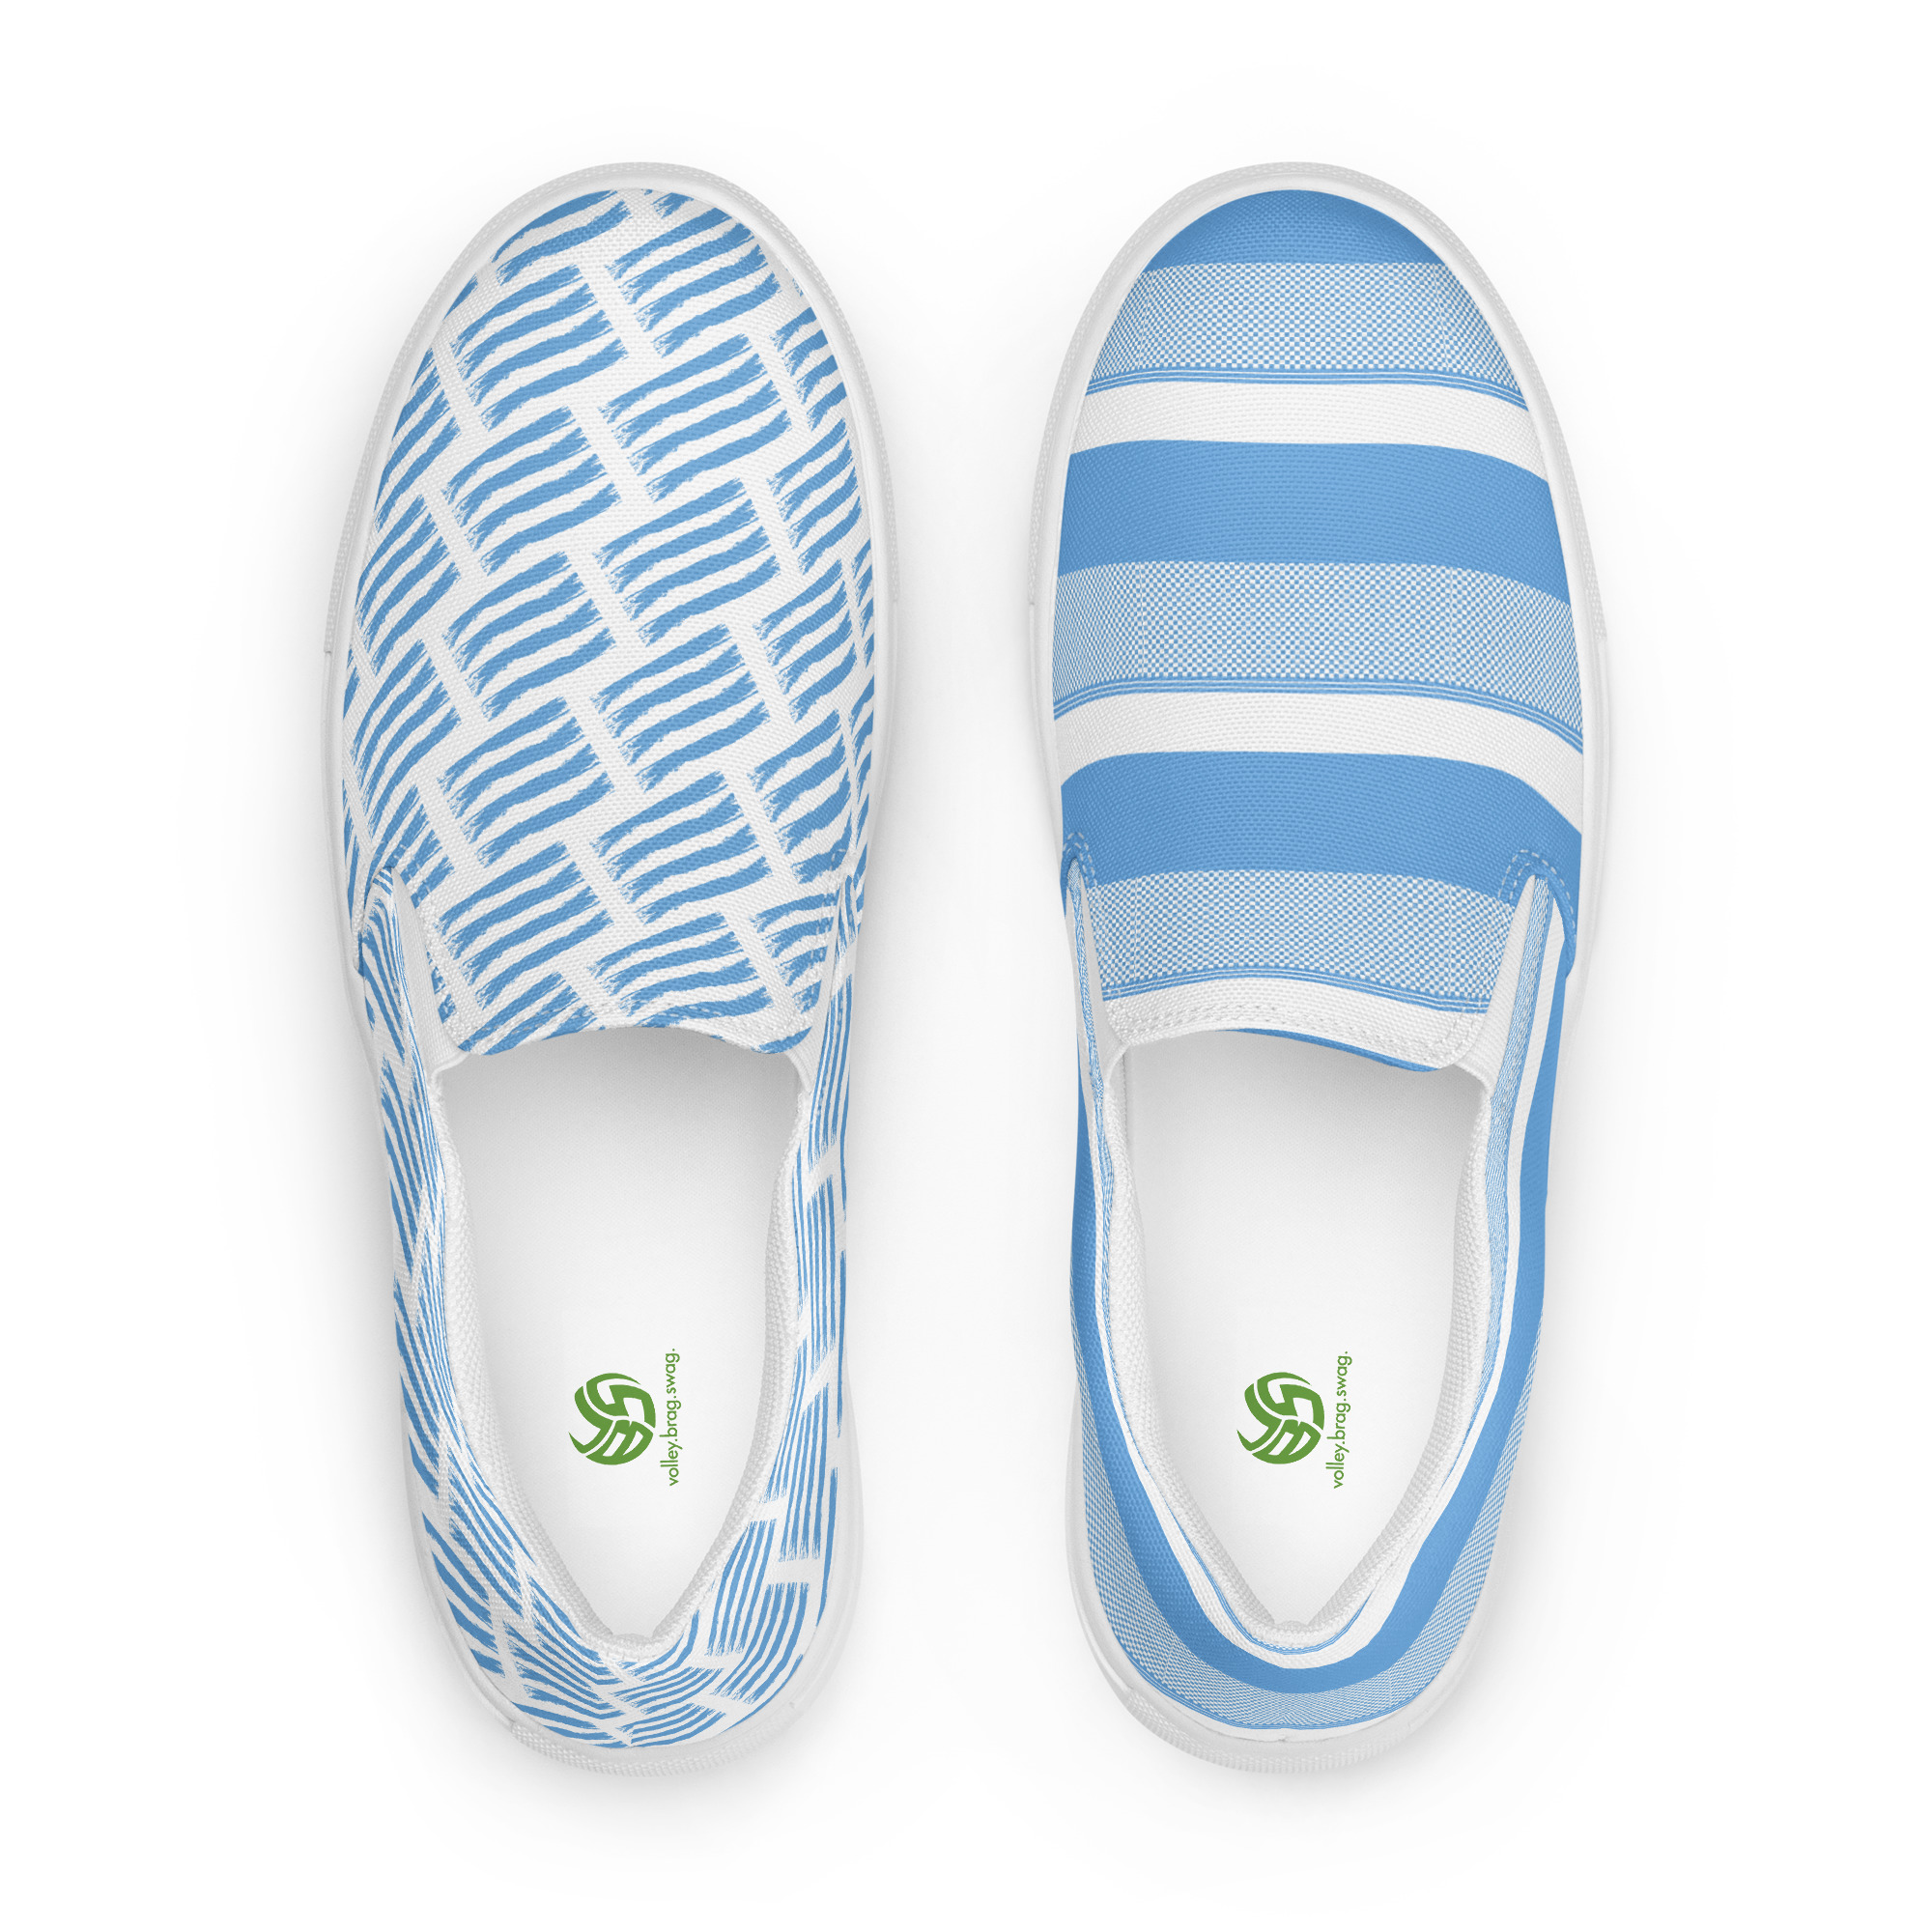 I designed my 2023 women slip on canvas shoes with colorful patterns and cute volleyball designs so beach volleyball players can mix and match with swimwear. 